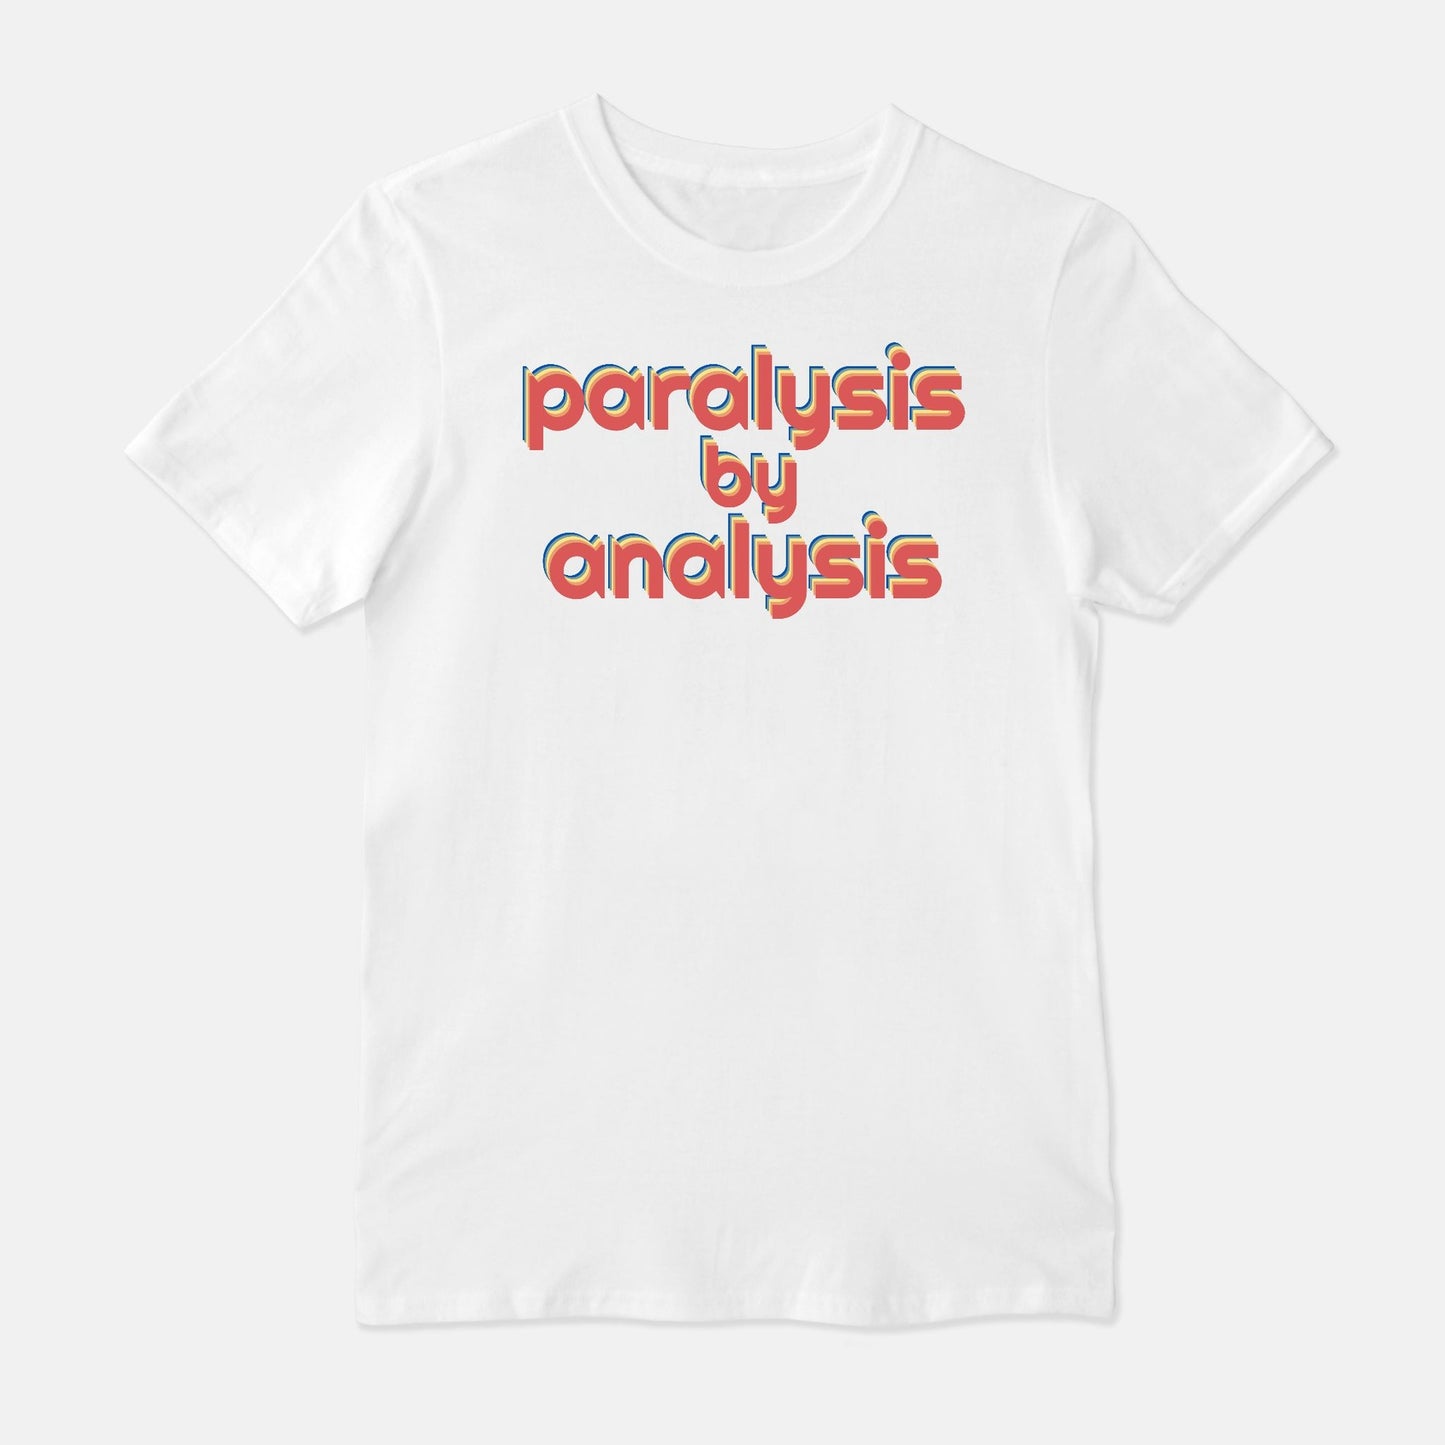 Paralysis by Analysis (Unisex Soft-style T-Shirt)